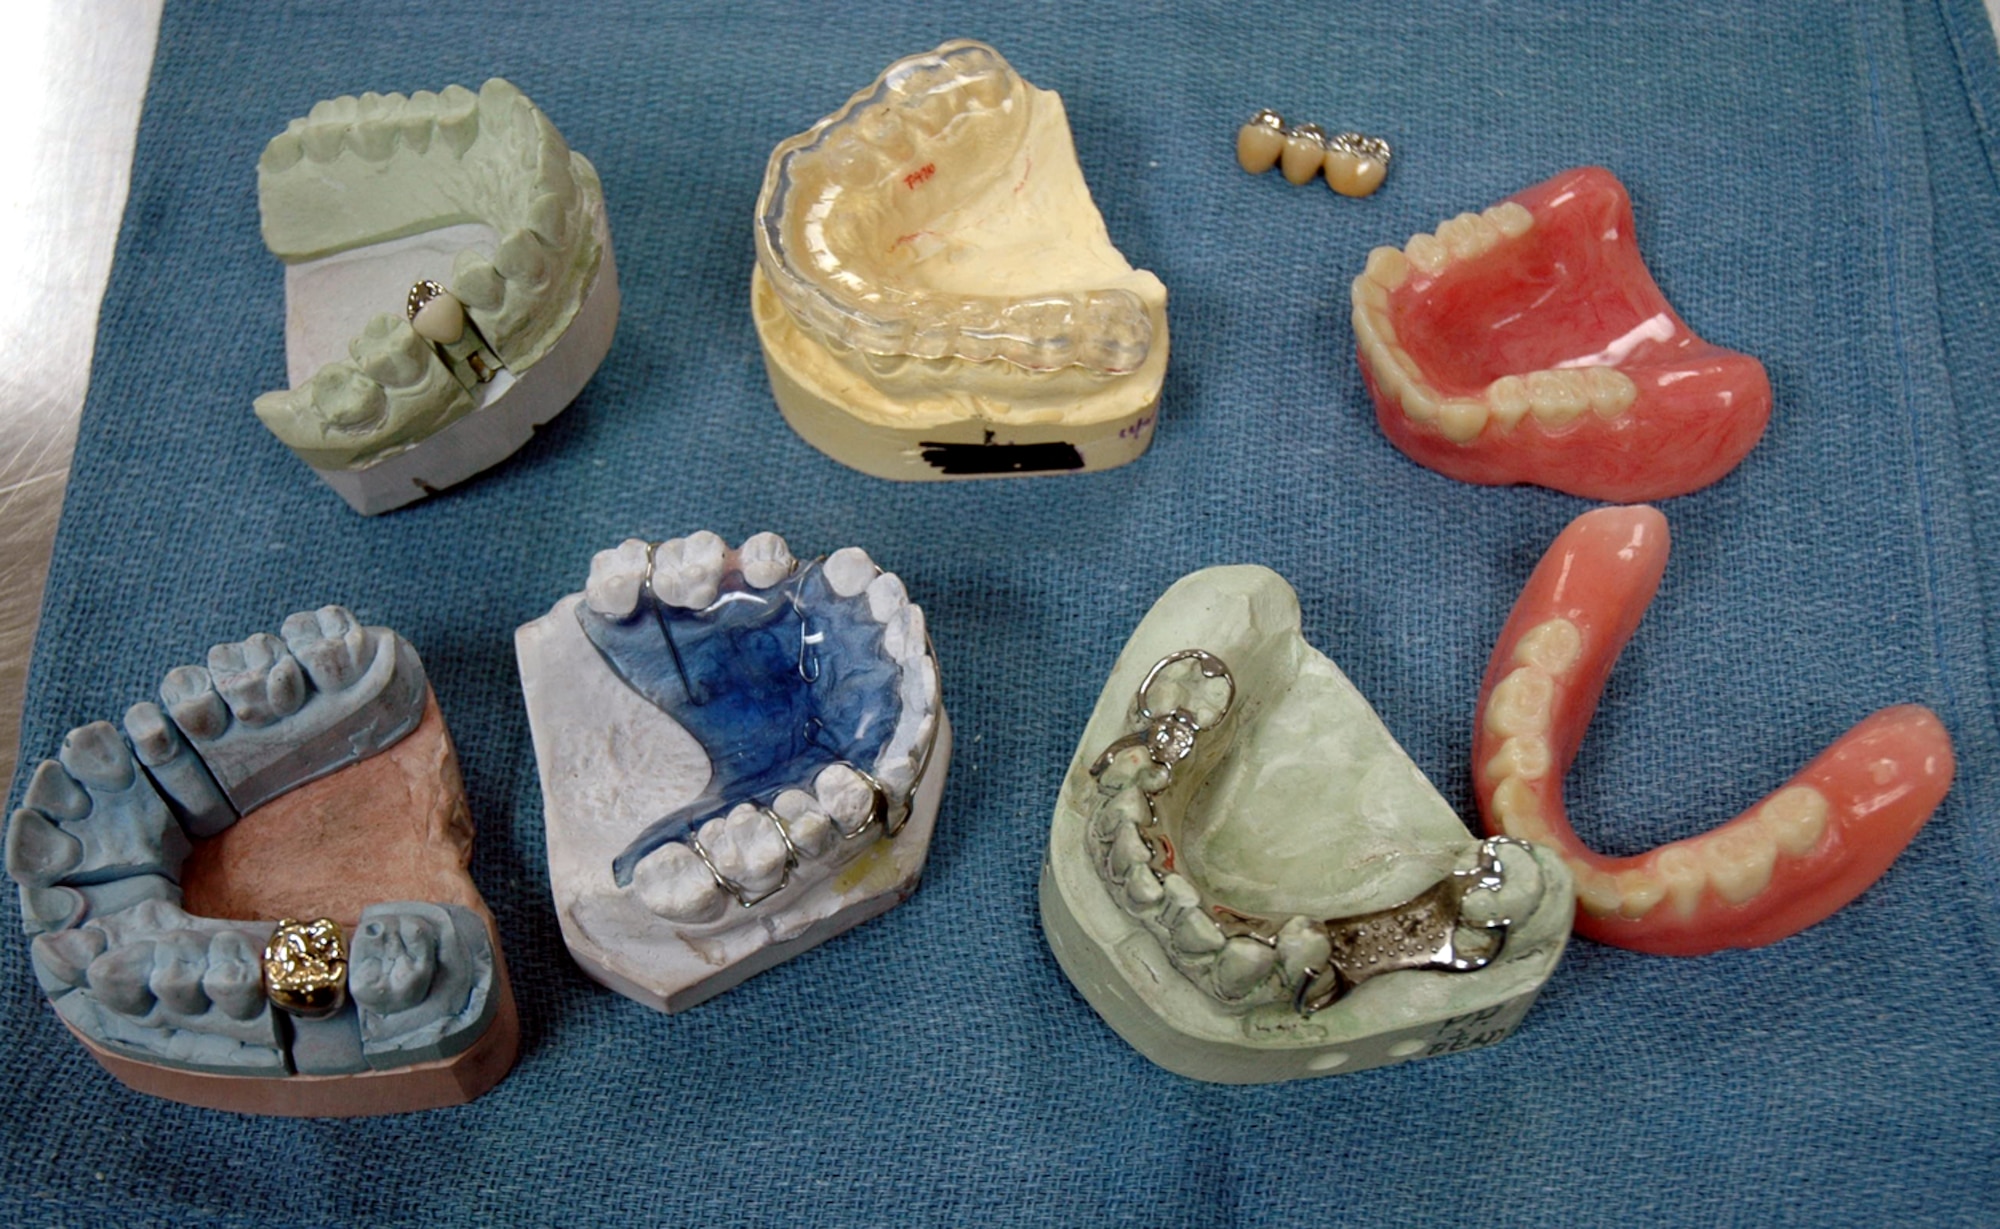 OSAN AIR BASE, Republic of Korea --  Examples of work that 51st Dental Squadron lab technicians do every day, including gold crowns, dentures and nightguards. (U.S. Air Force photo by Staff Sgt. Benjamin Rojek)